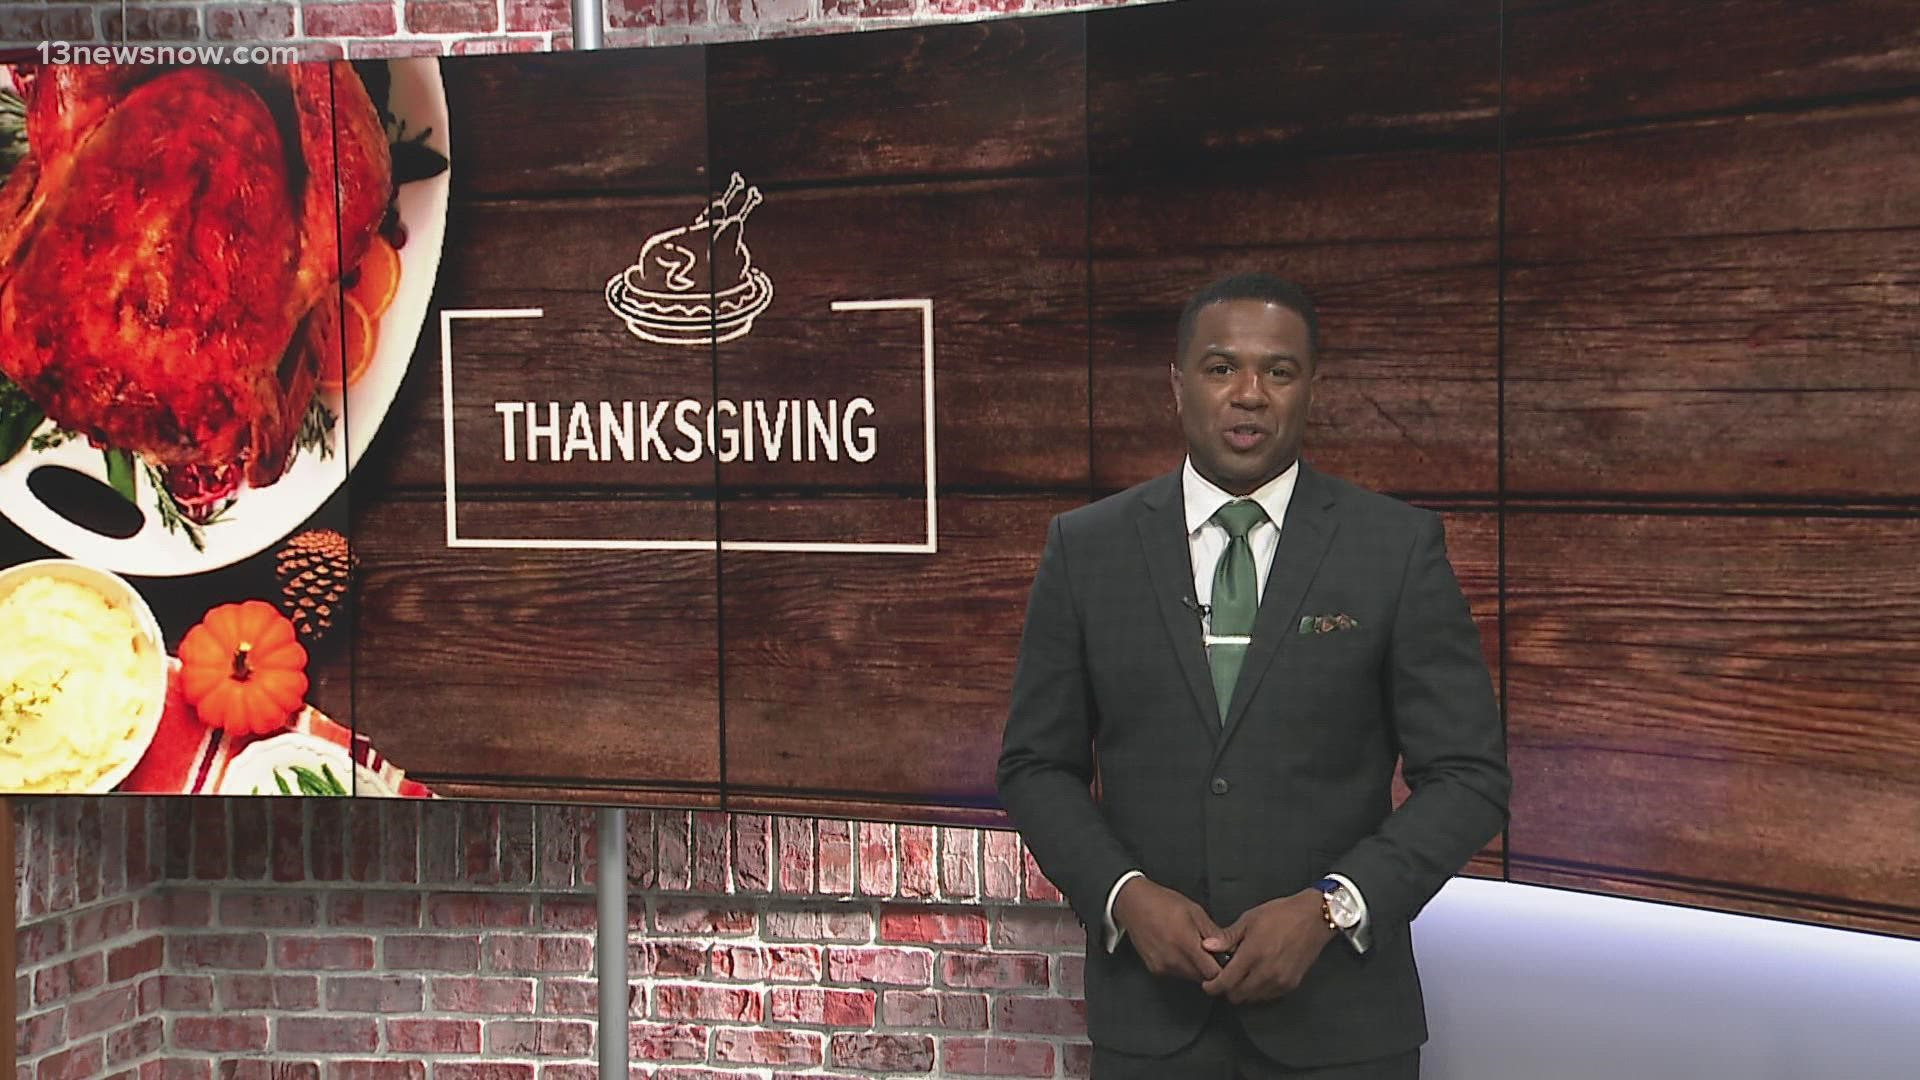 Check out the latest headlines from 13News Now at 11 including what local firefighters are doing to celebrate Thanksgiving.